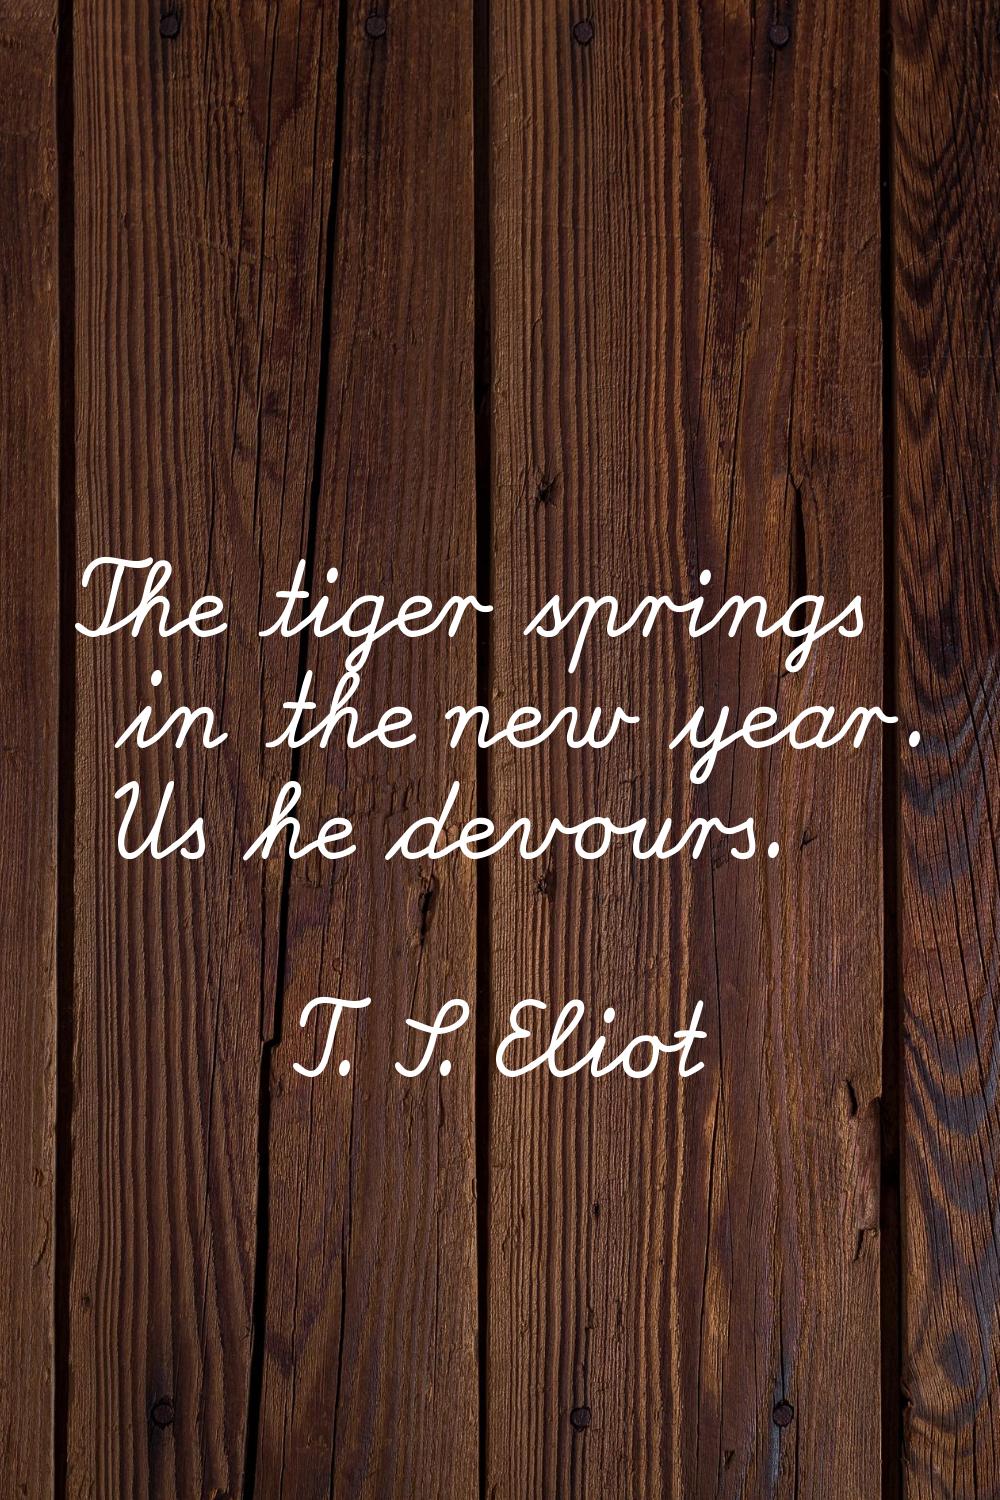 The tiger springs in the new year. Us he devours.